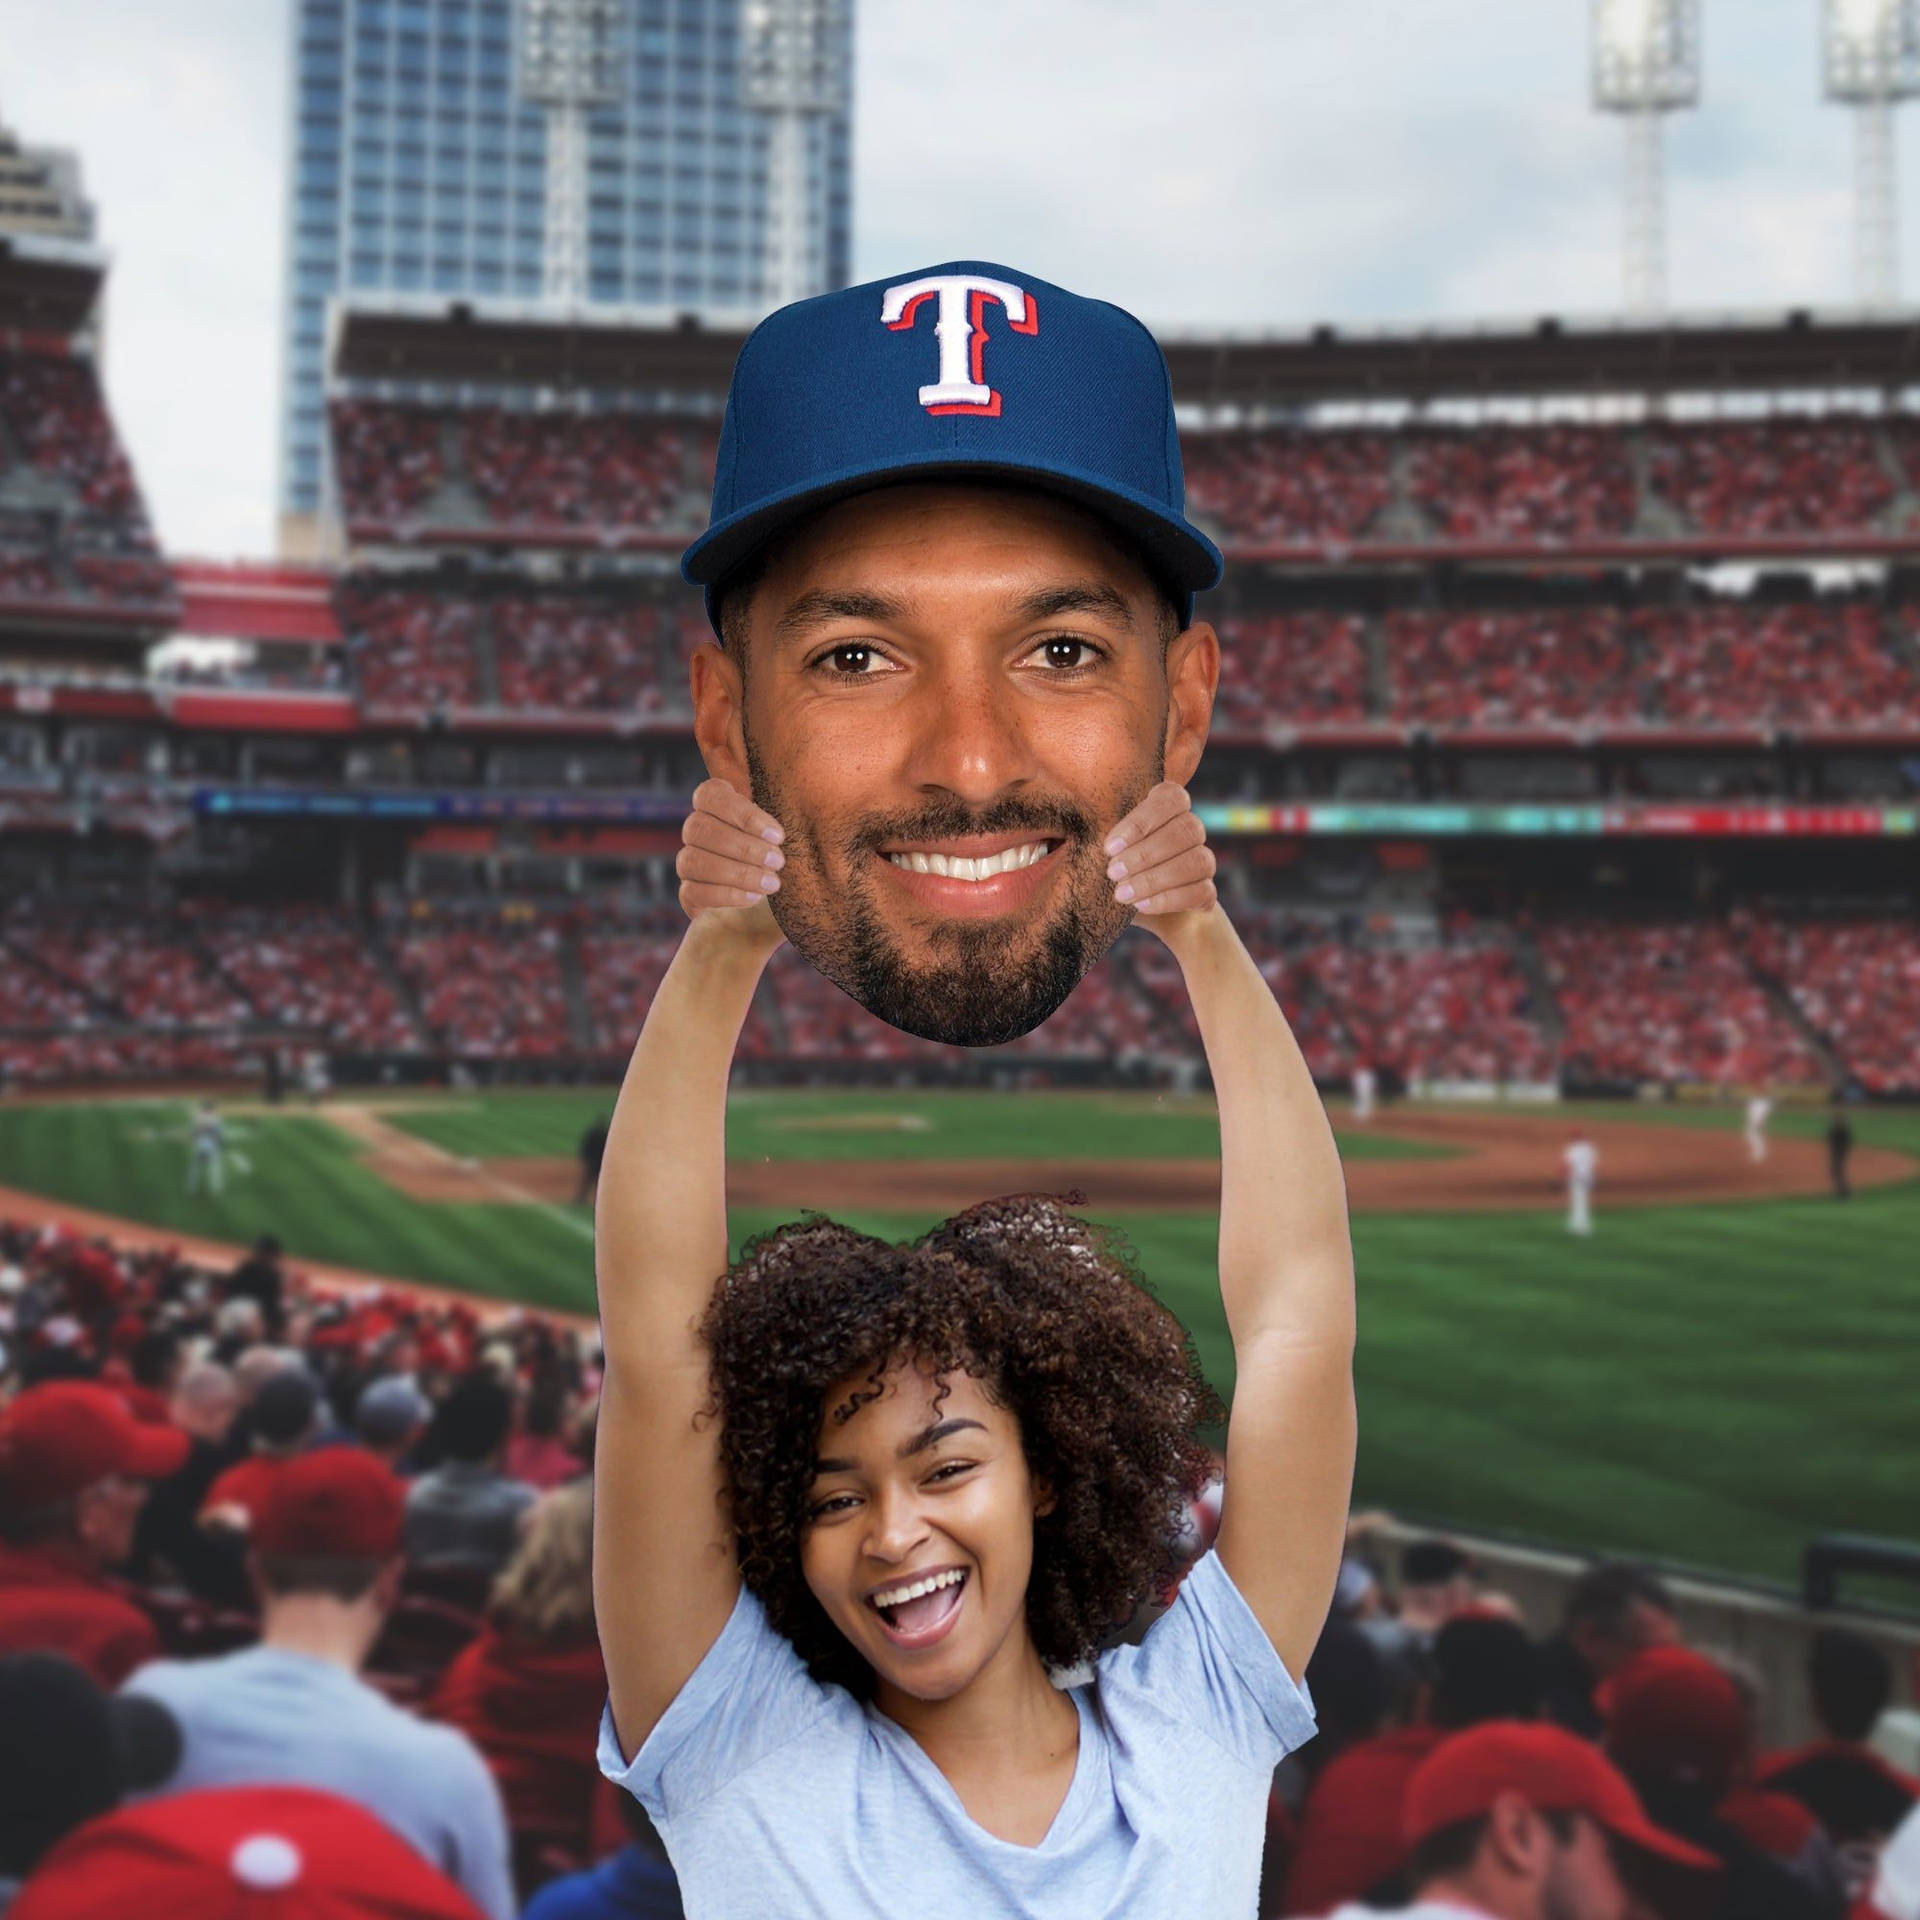 Marcus Semien Fan Holding A Cut-out Background